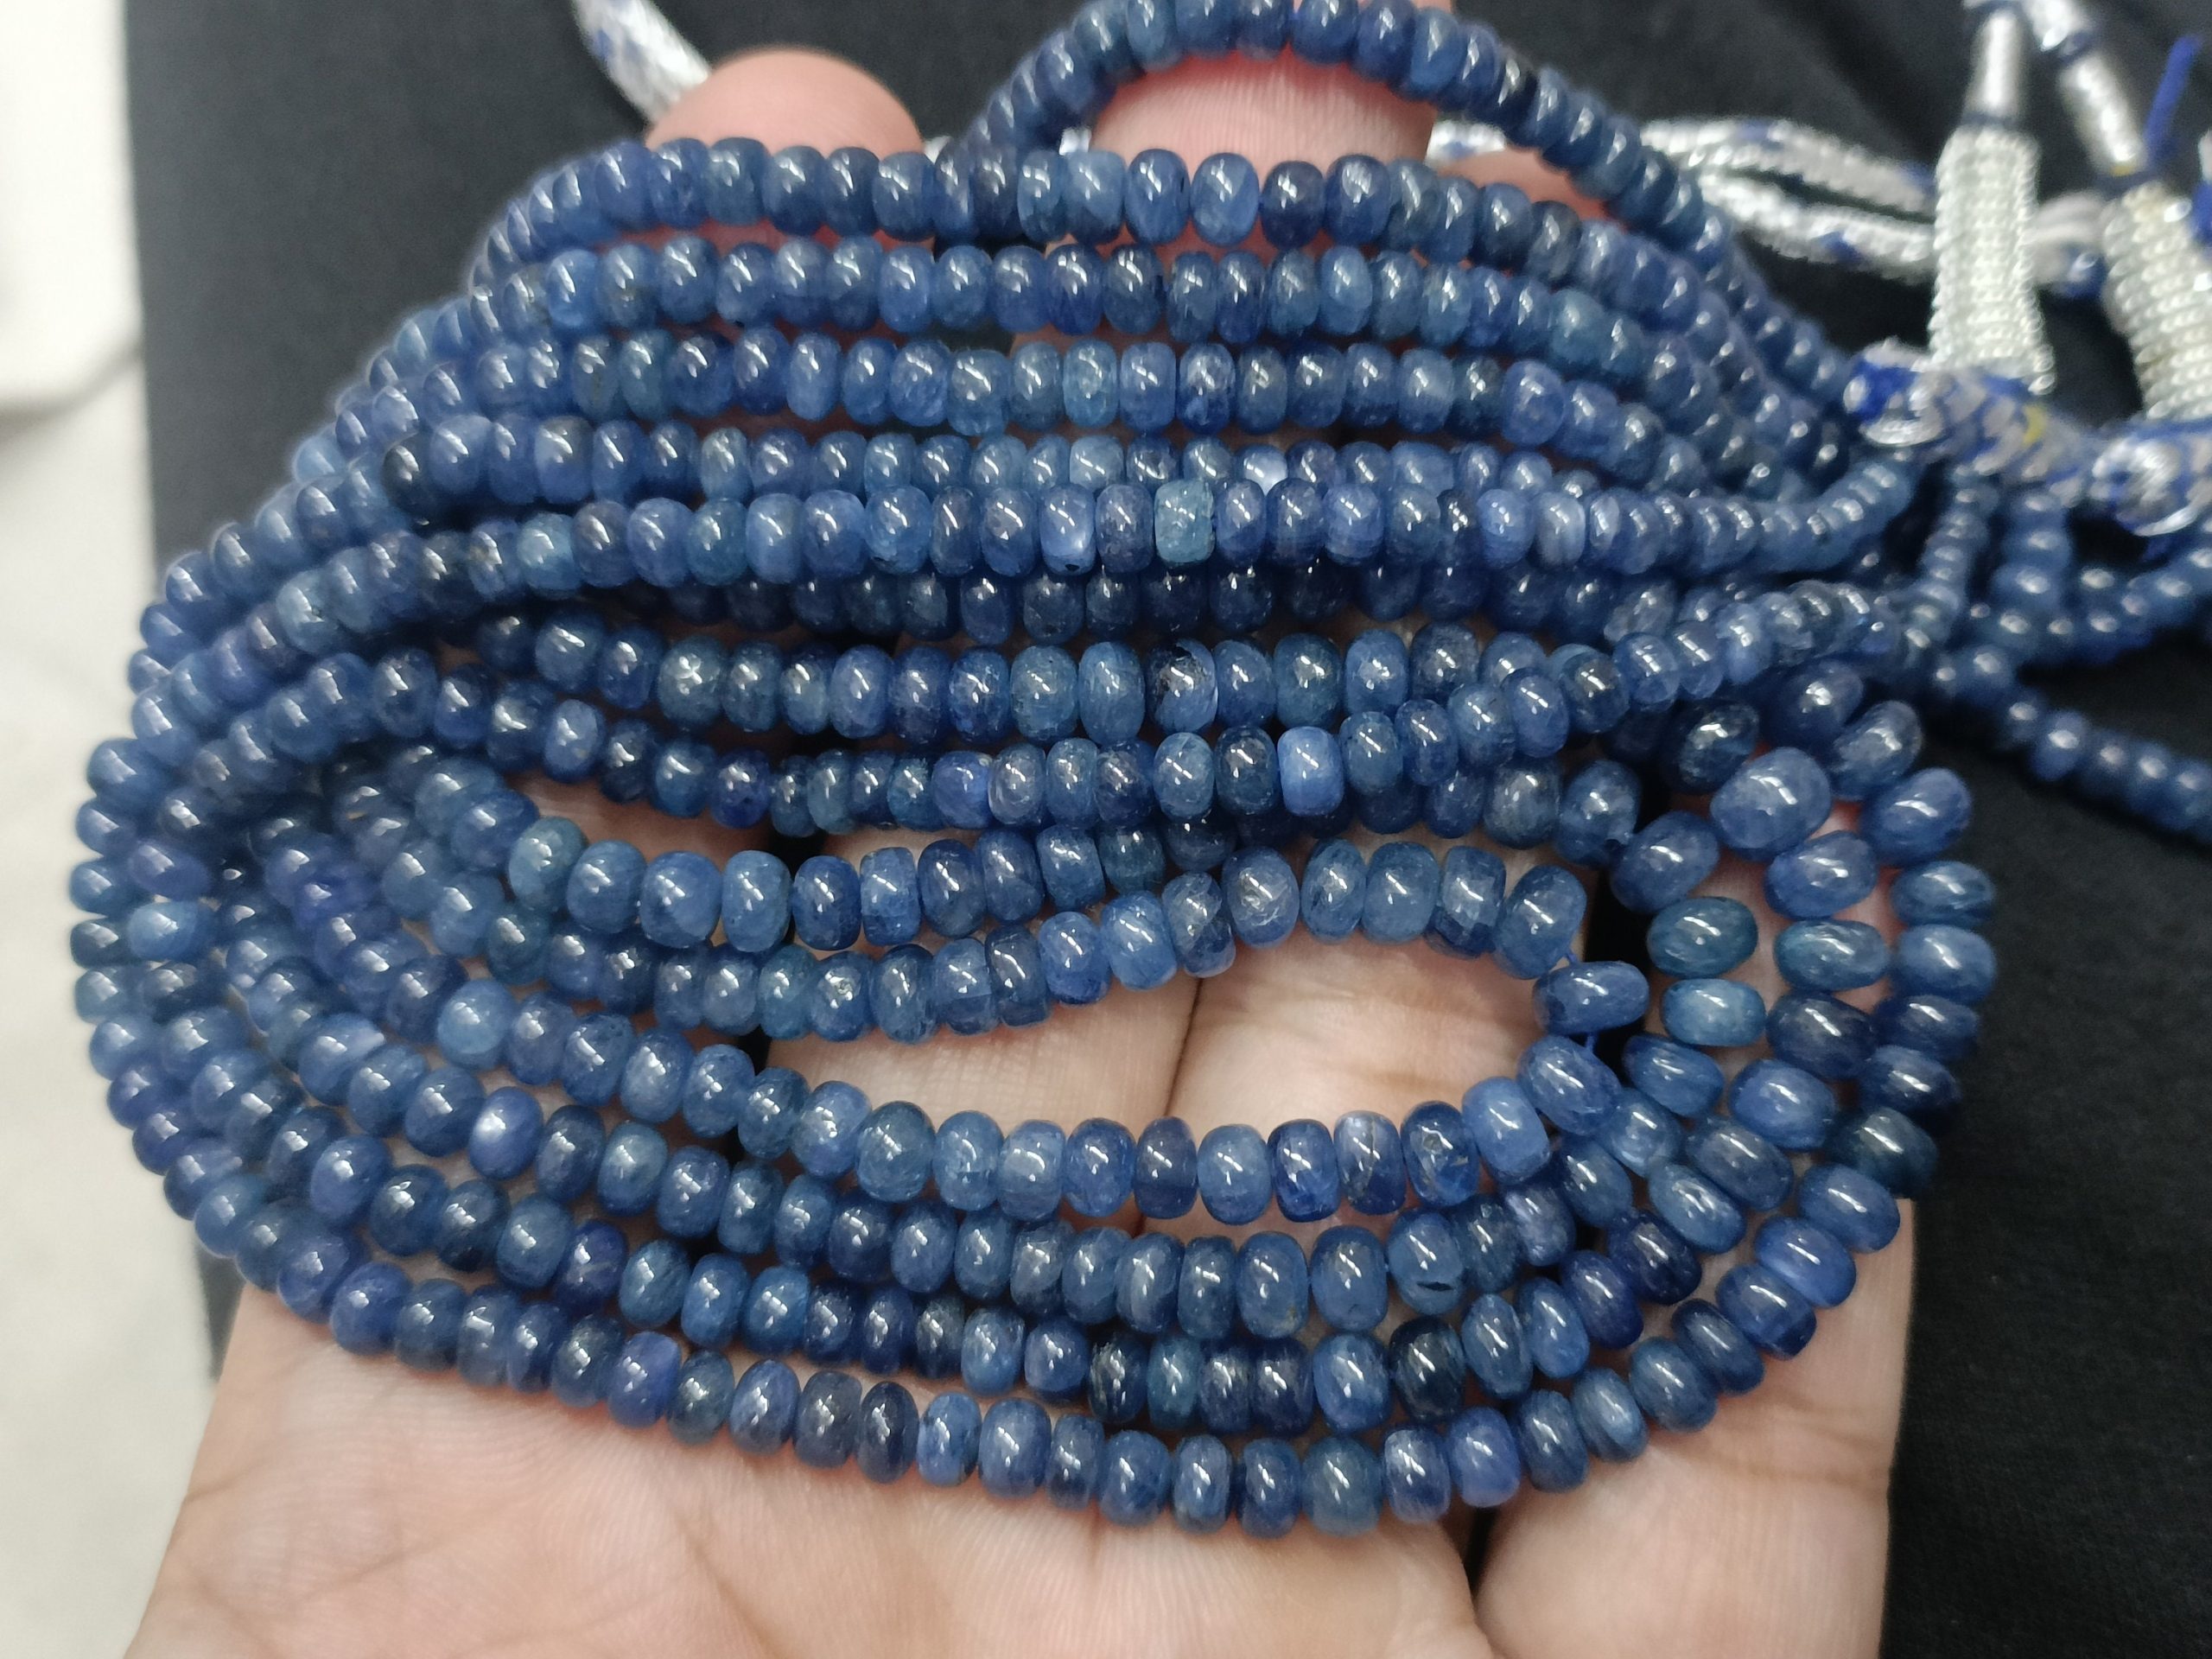 7 Inches Strand, Superb-finest Quality, Natural Burmese Blue Sapphire Smooth Rondelles,size.4-5.5mm1002